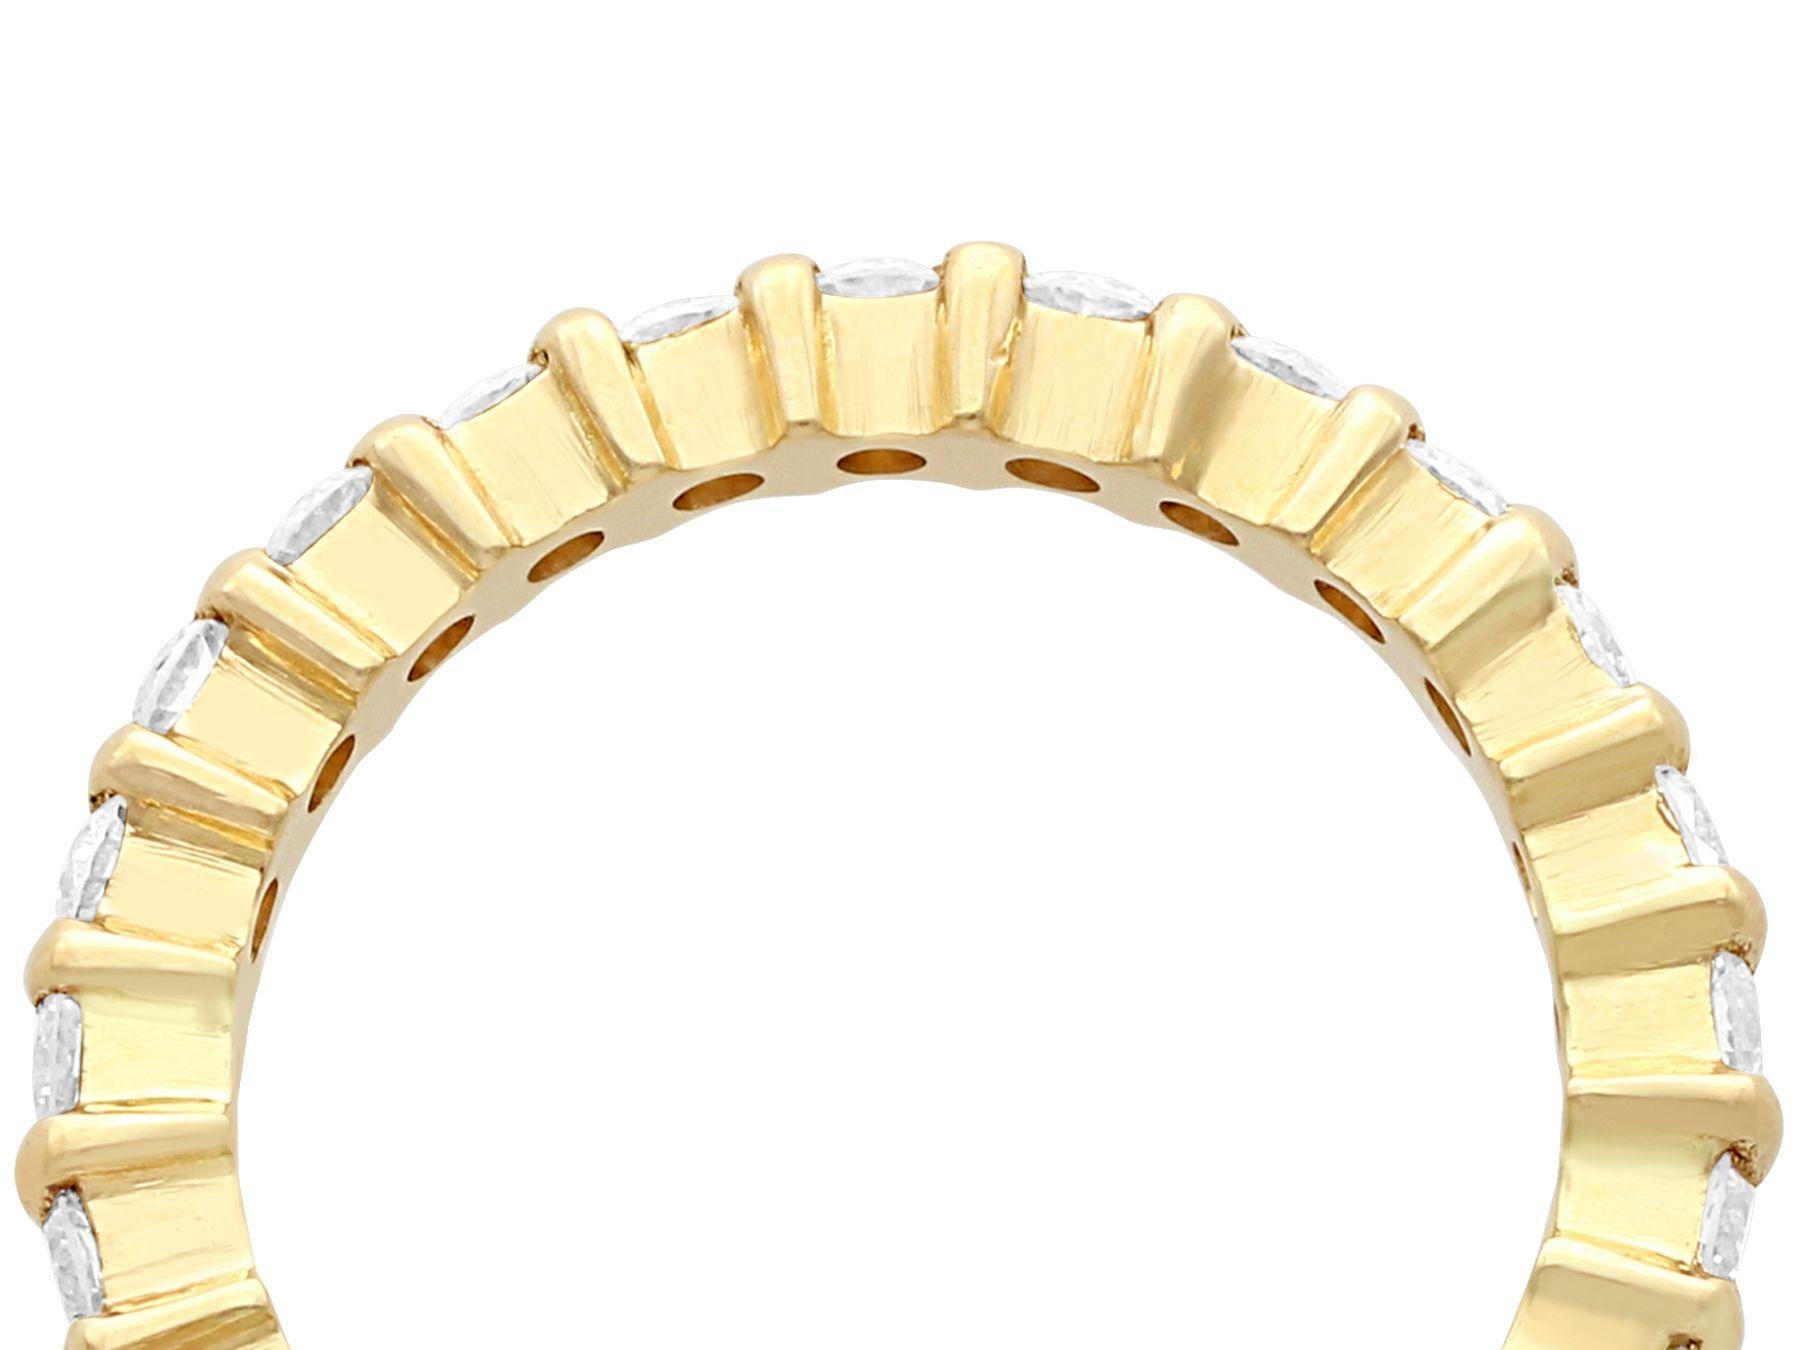 An impressive contemporary 0.87 carat diamond and 18 karat yellow gold full eternity ring; part of our diamond jewelry collections.

This fine and impressive full diamond eternity ring has been crafted in 18k yellow gold.

The yellow gold setting is